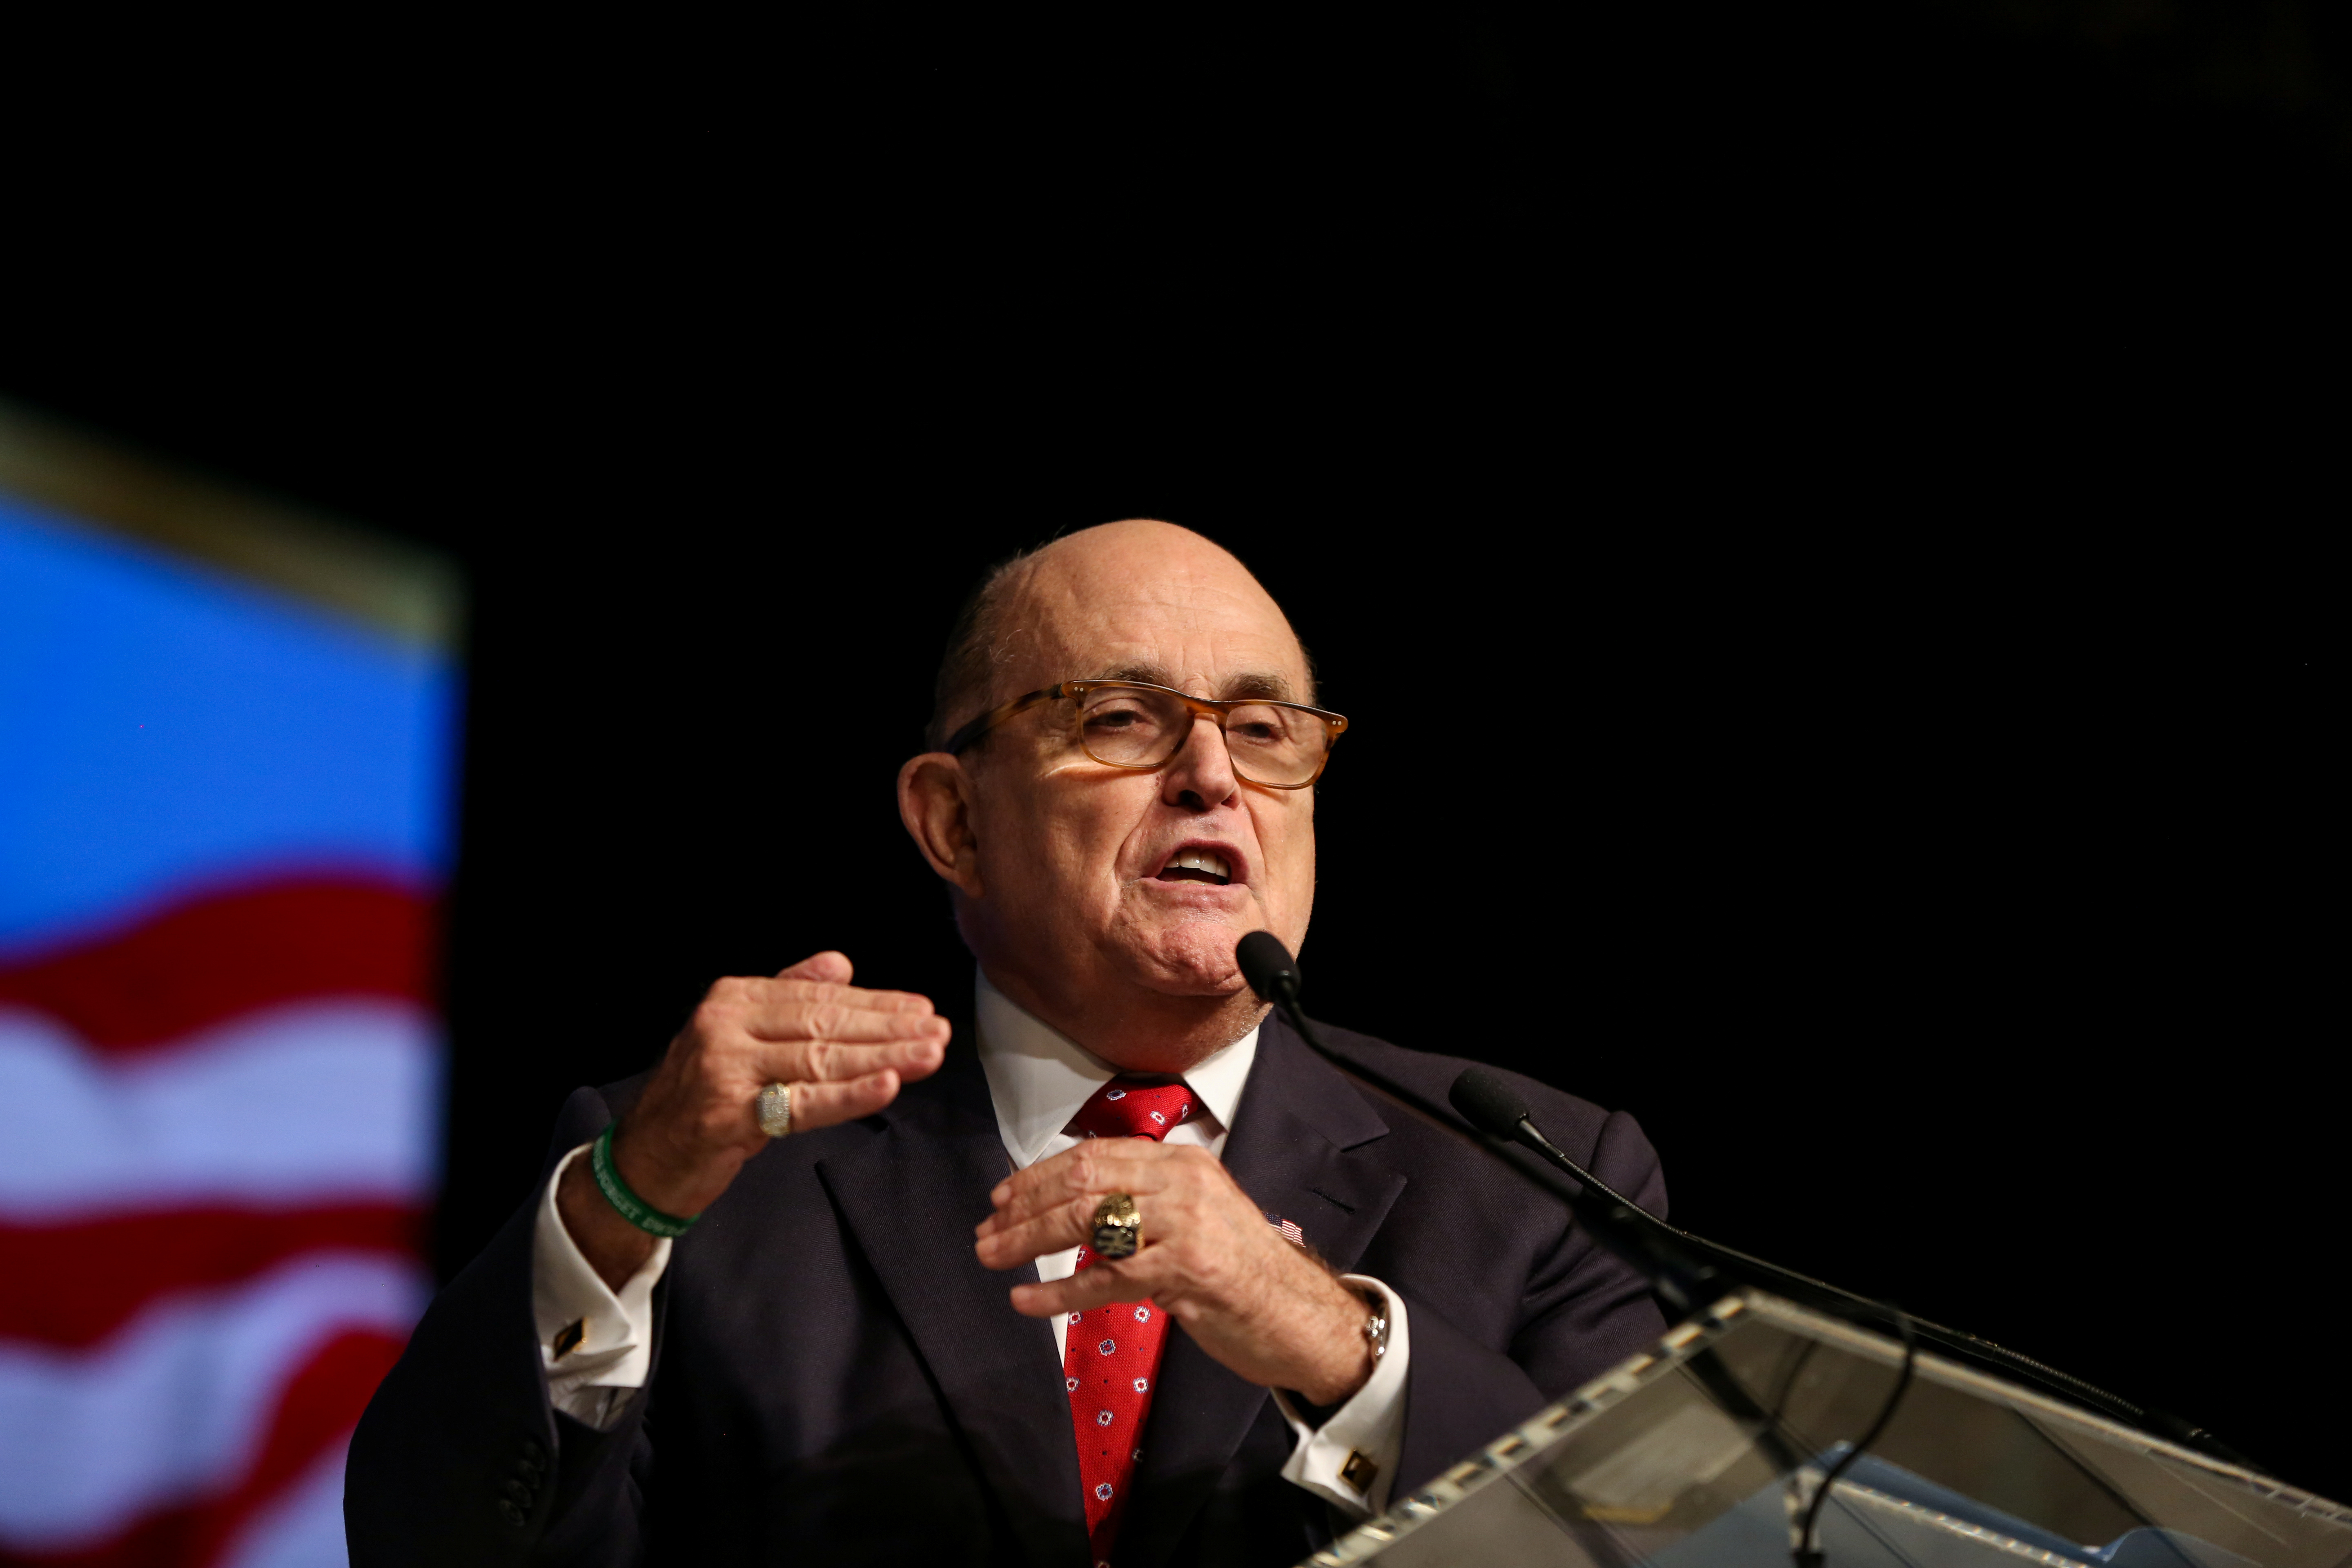 Rudolph Giuliani, former Mayor of New York City, delivers a speech during the 2018 Iran Uprising Summit in New York